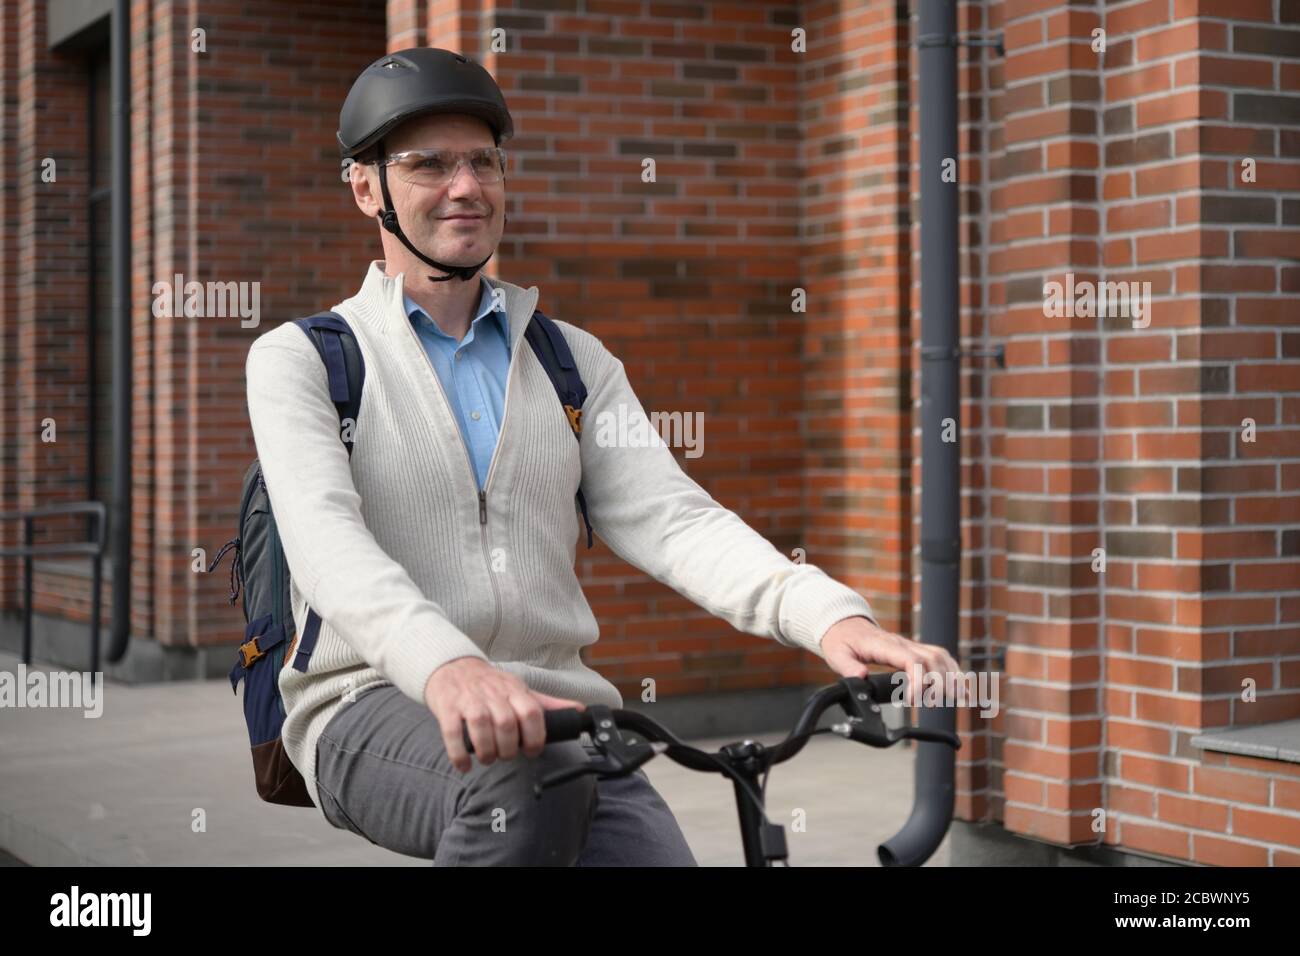 Mature Caucasian man in a bicycle helmet on his bike in a city Stock Photo